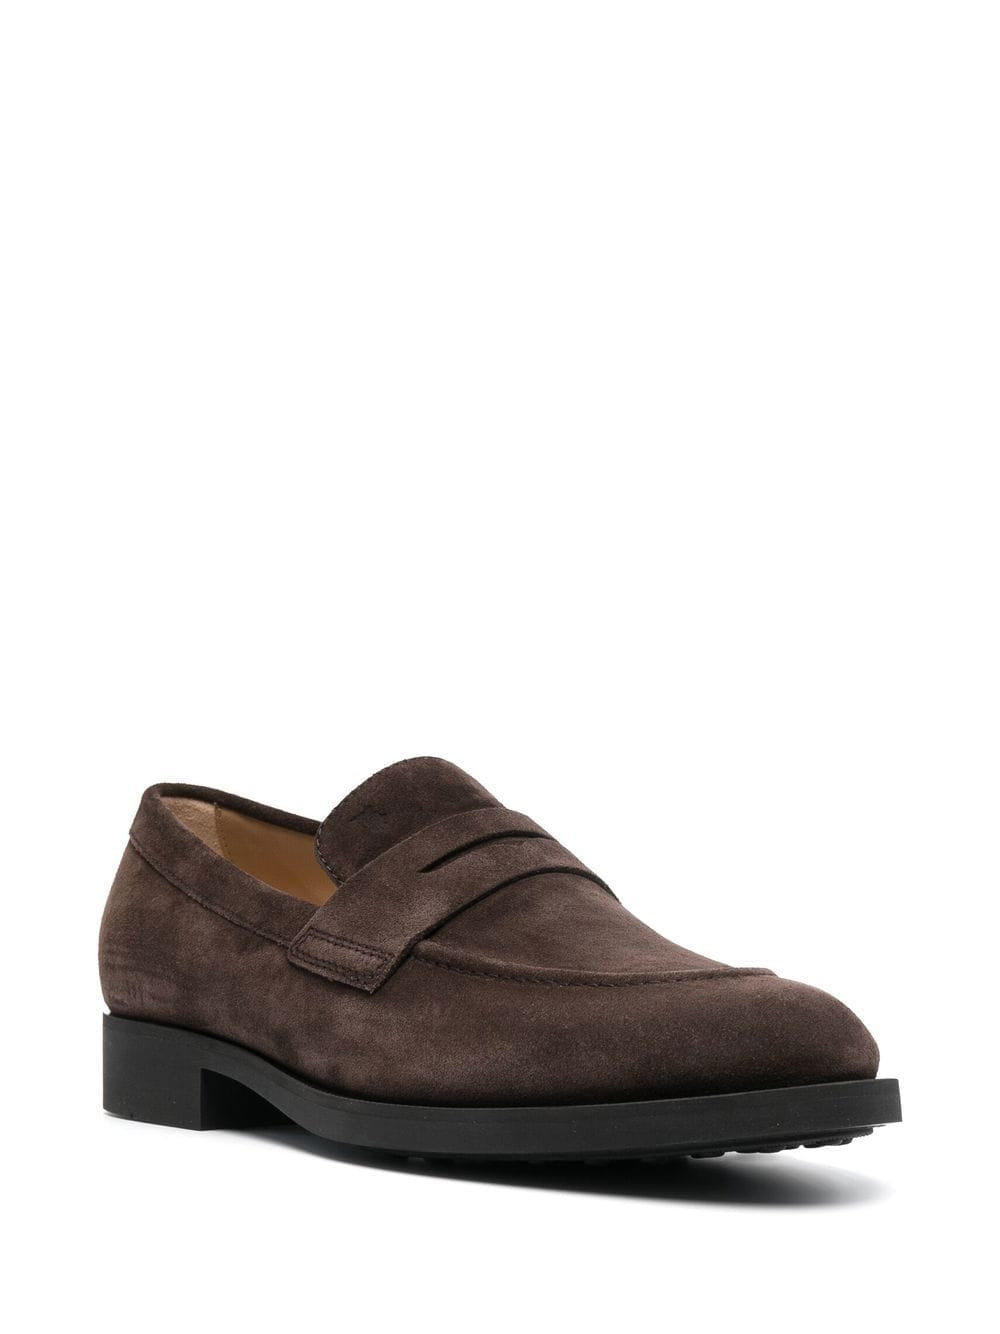 Suede moccasin loafers